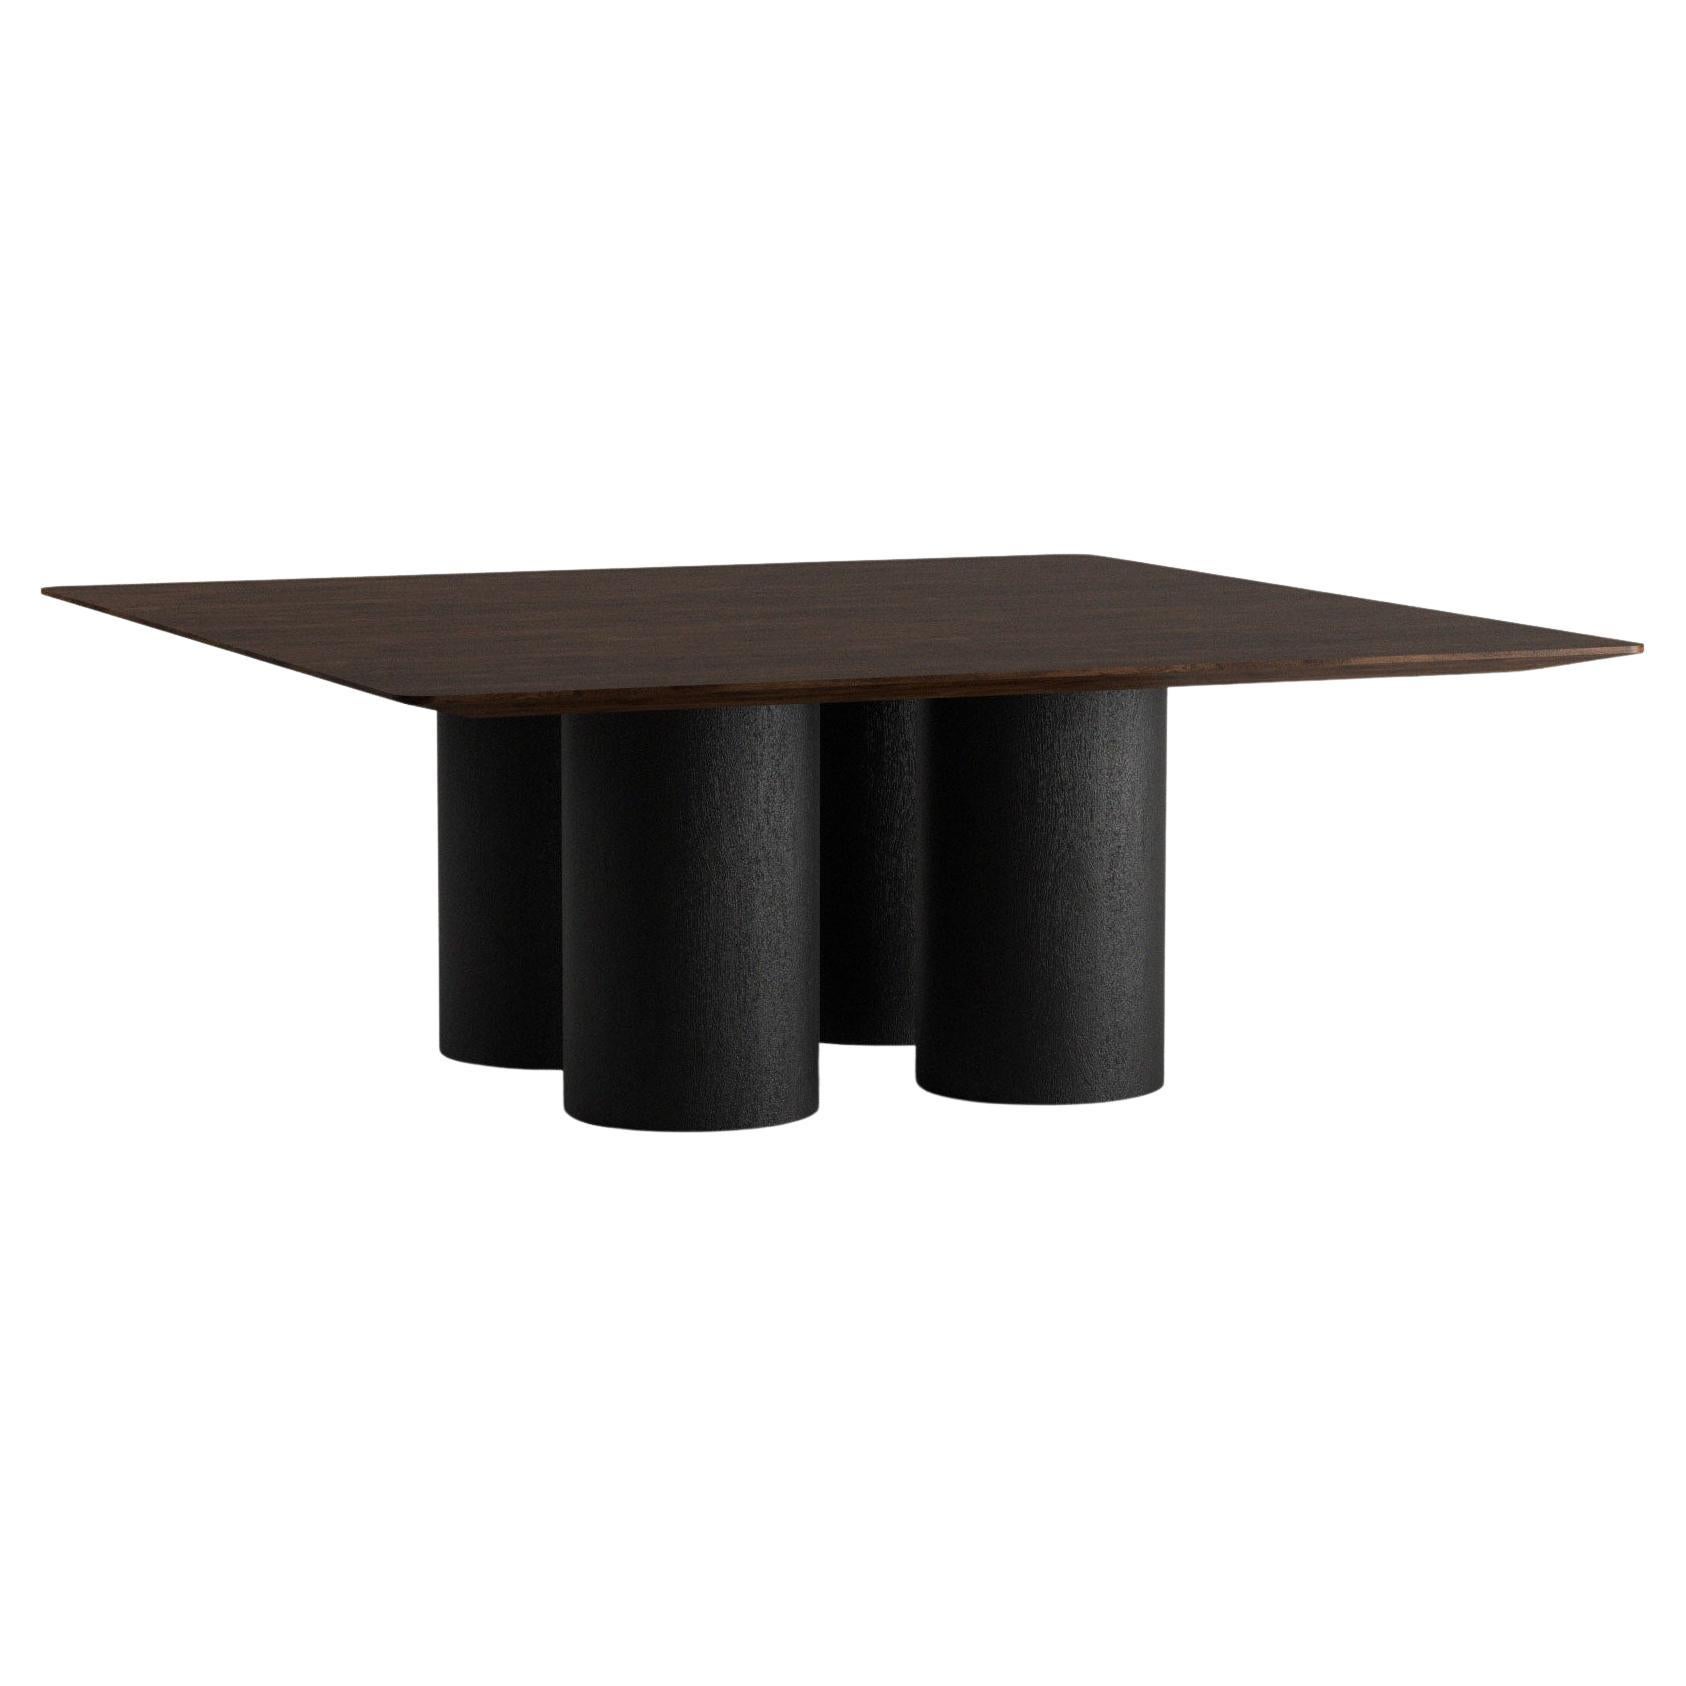 Pier Square Dining Table by Siete Studio